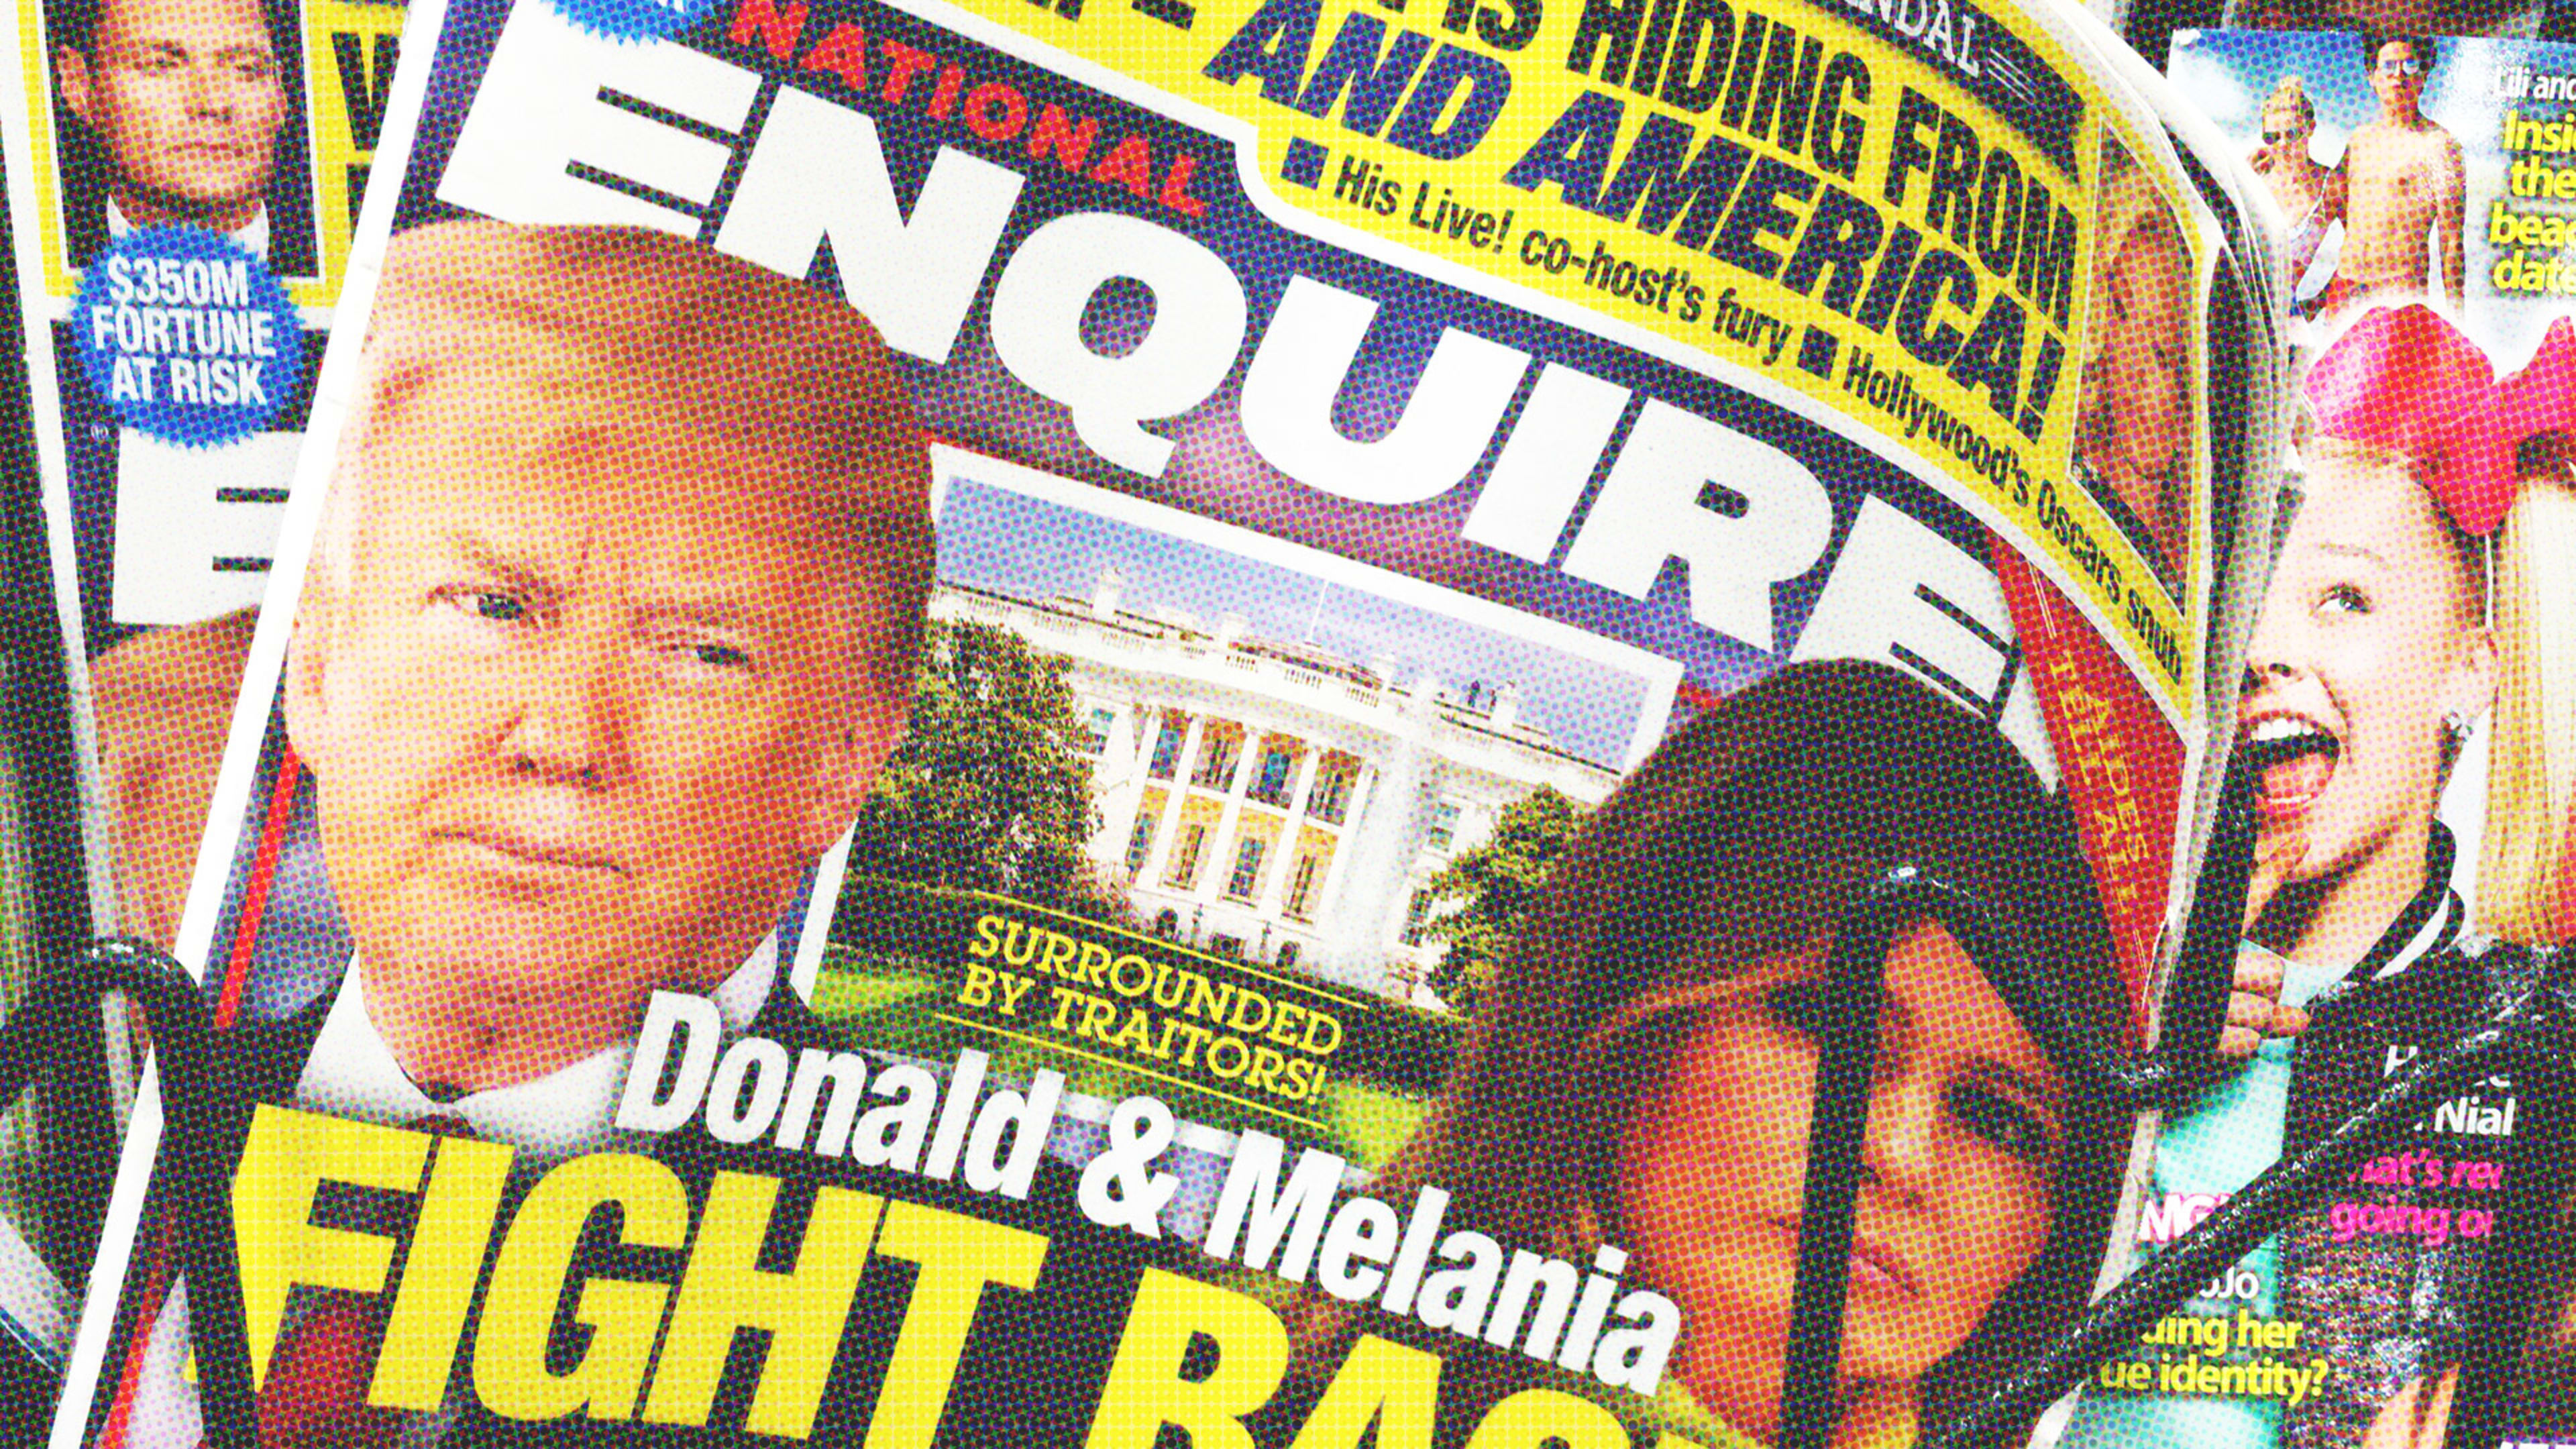 State pension funds invested millions in hedge fund that controls “National Enquirer” parent